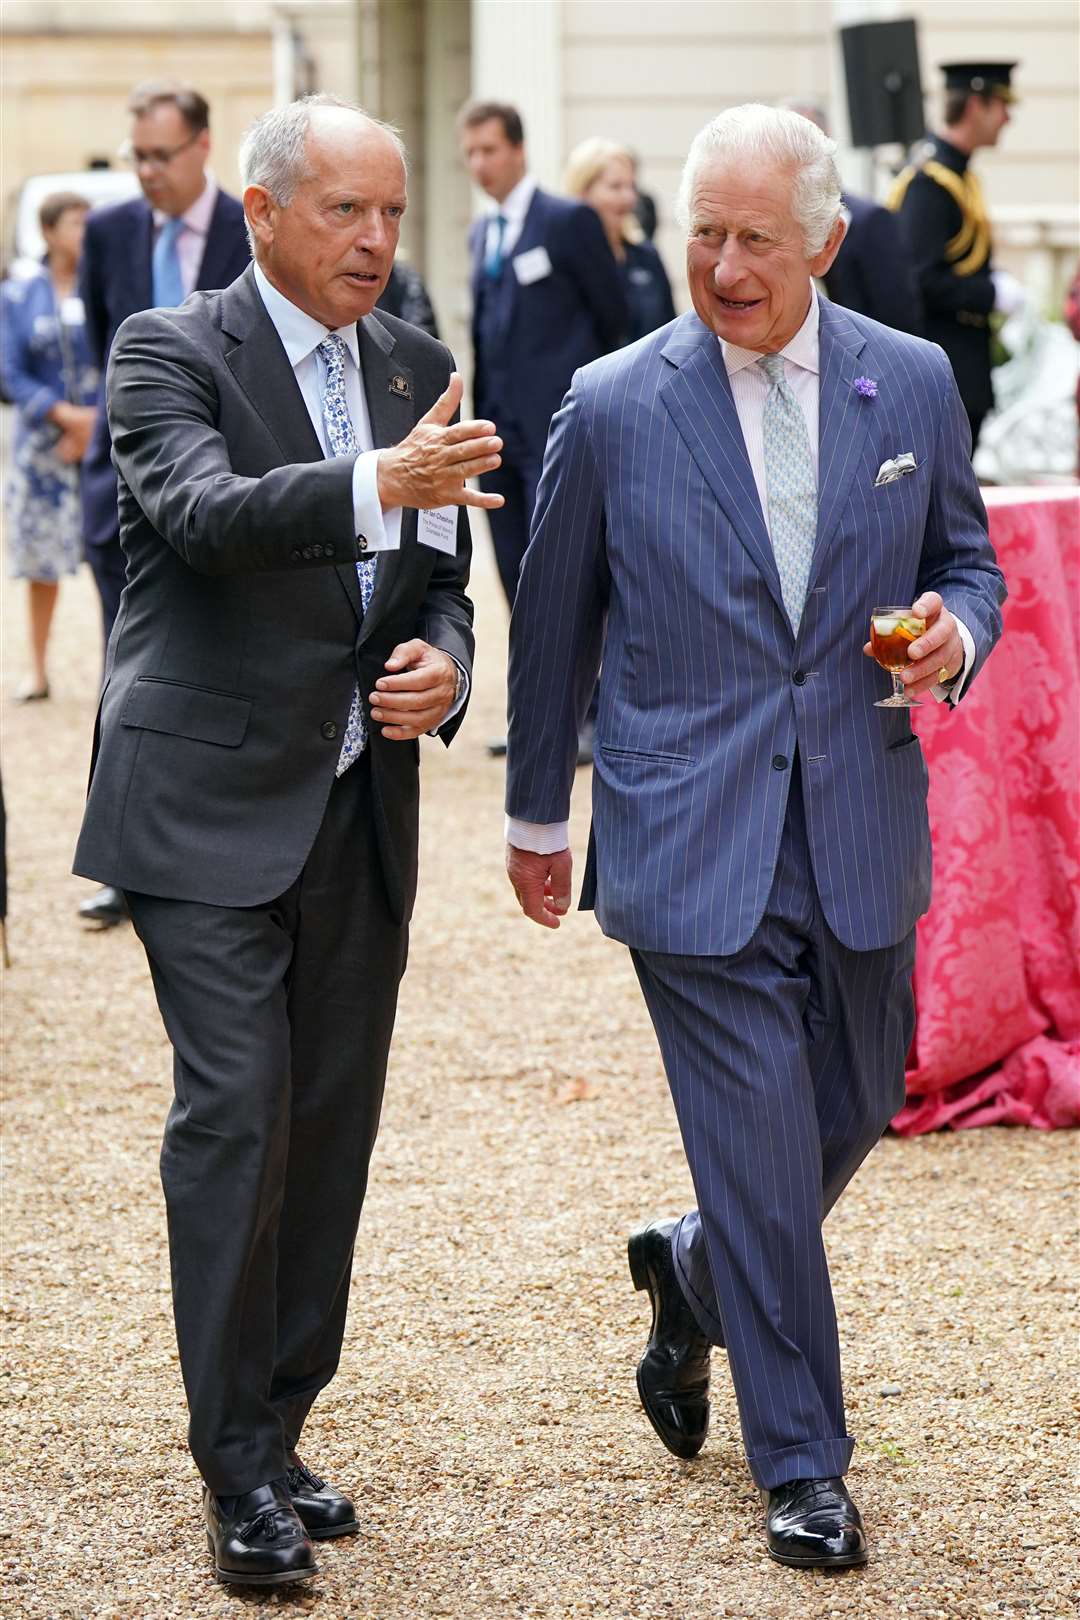 The King and Sir Ian Cheshire during the reception at Clarence House (Jonathan Brady/PA)